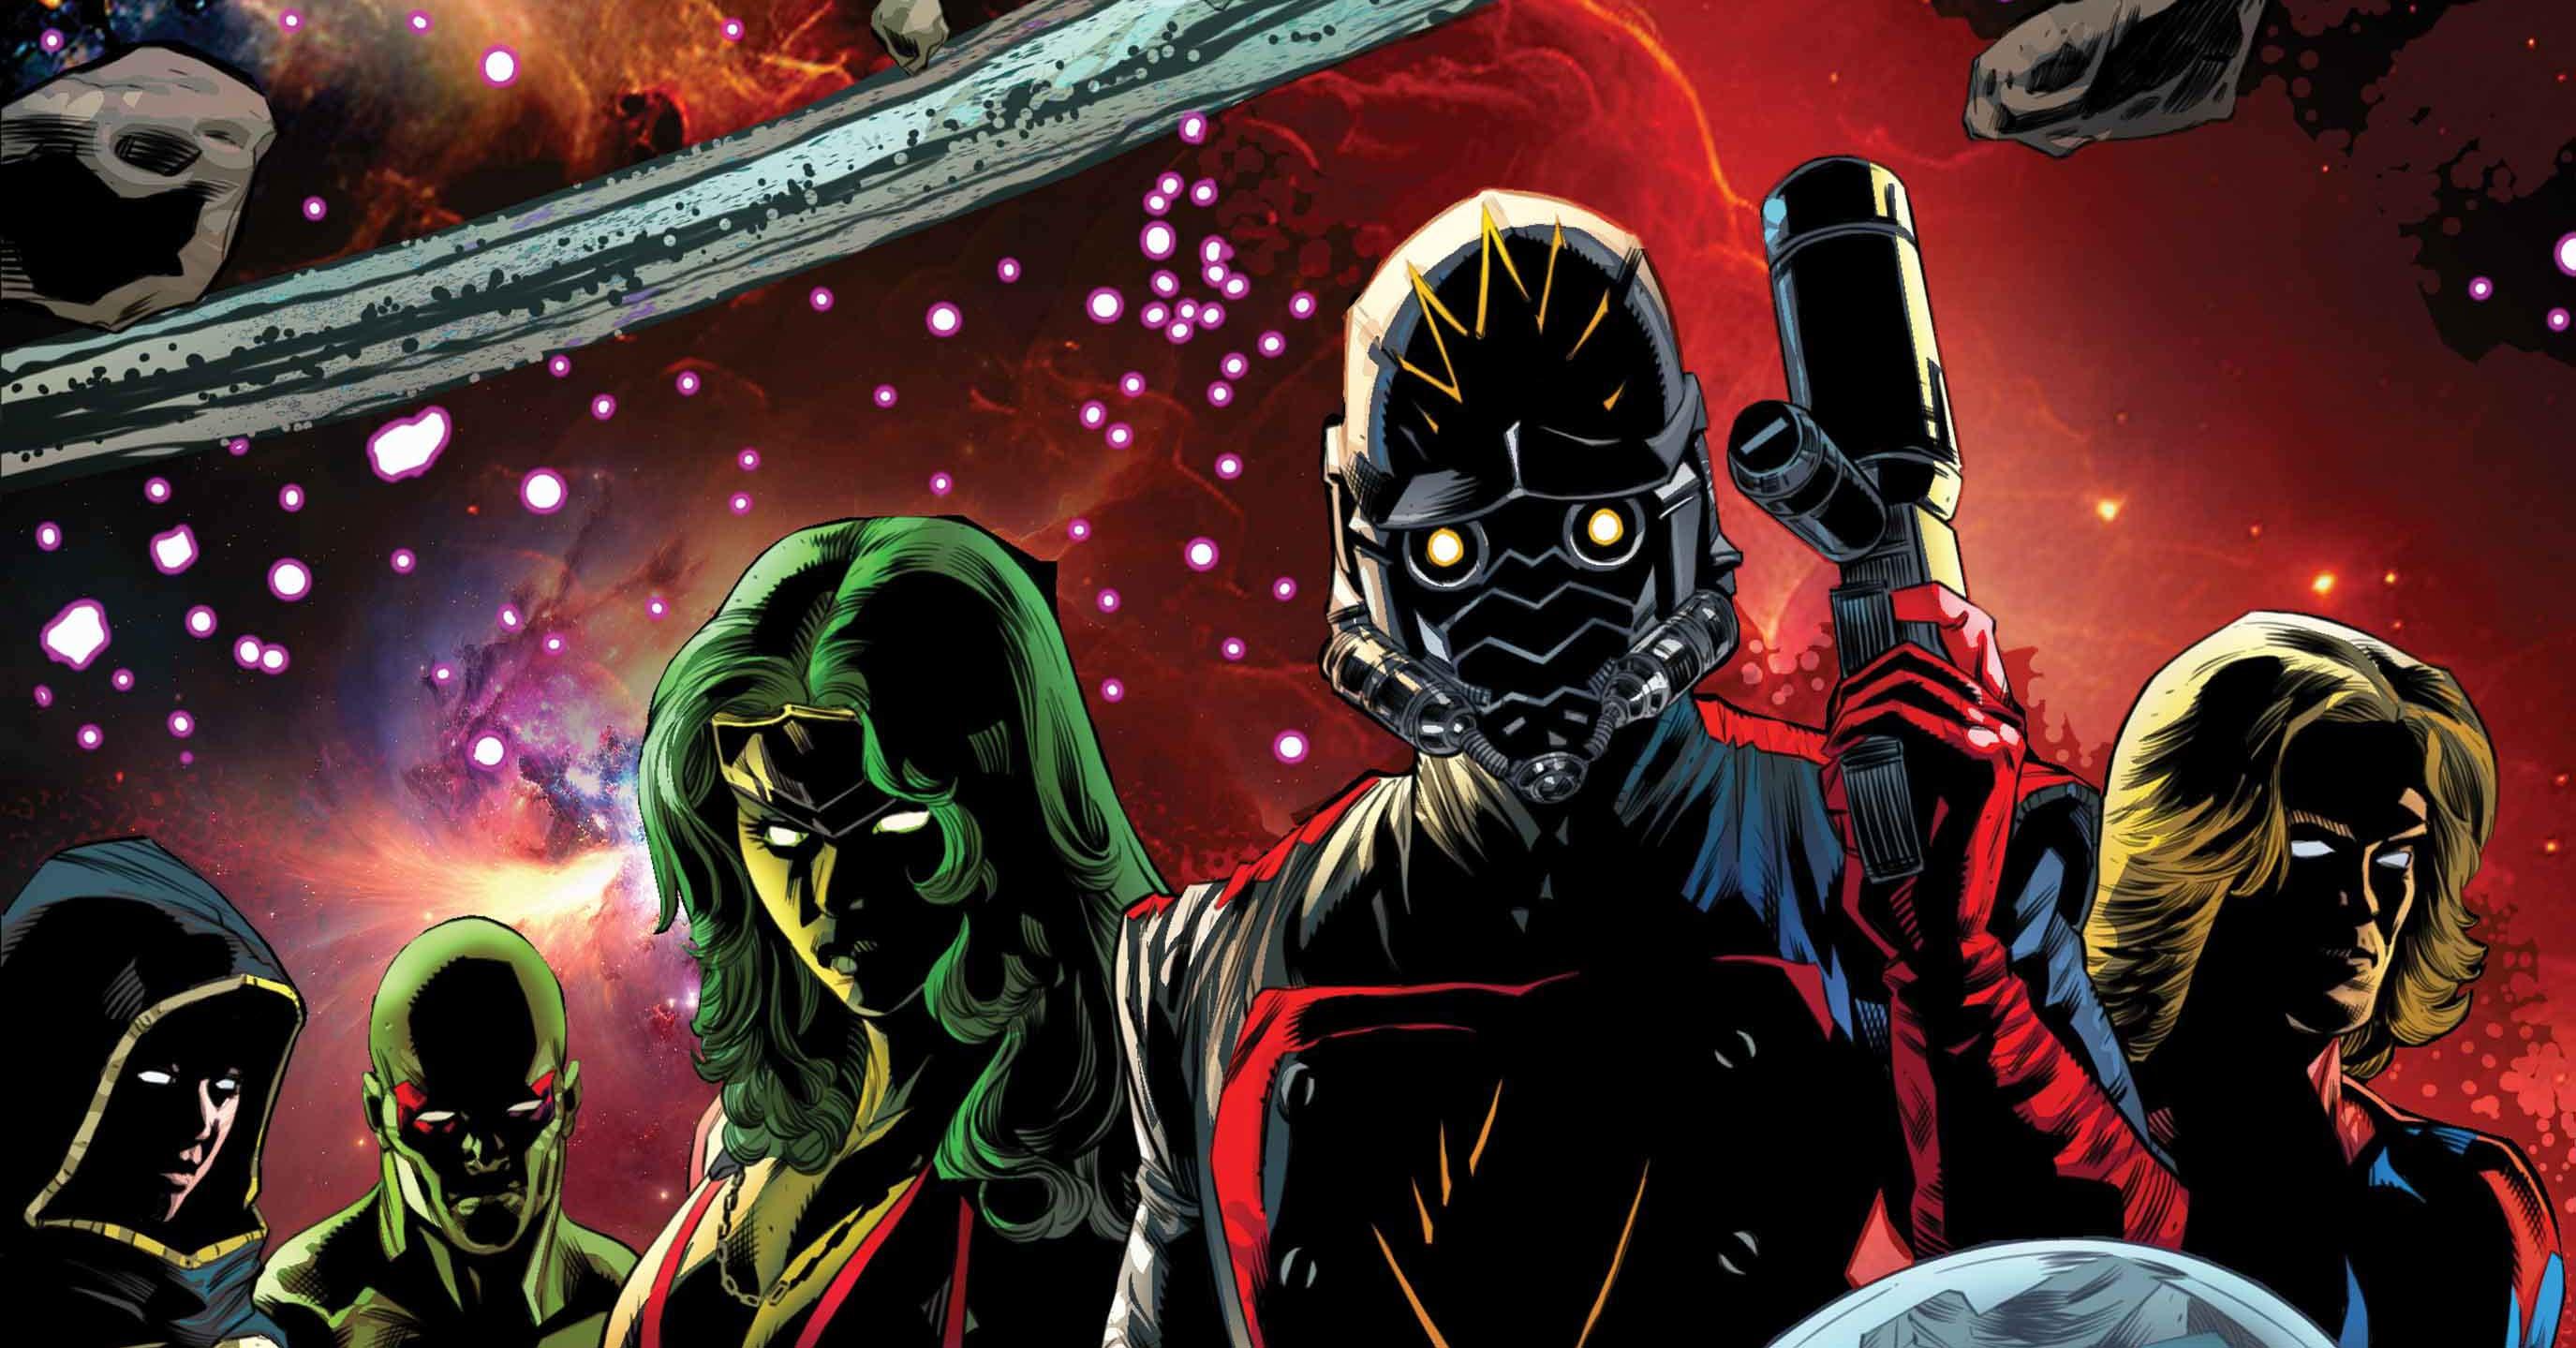 guardians-of-the-galaxy-avengers-homage-covers-header